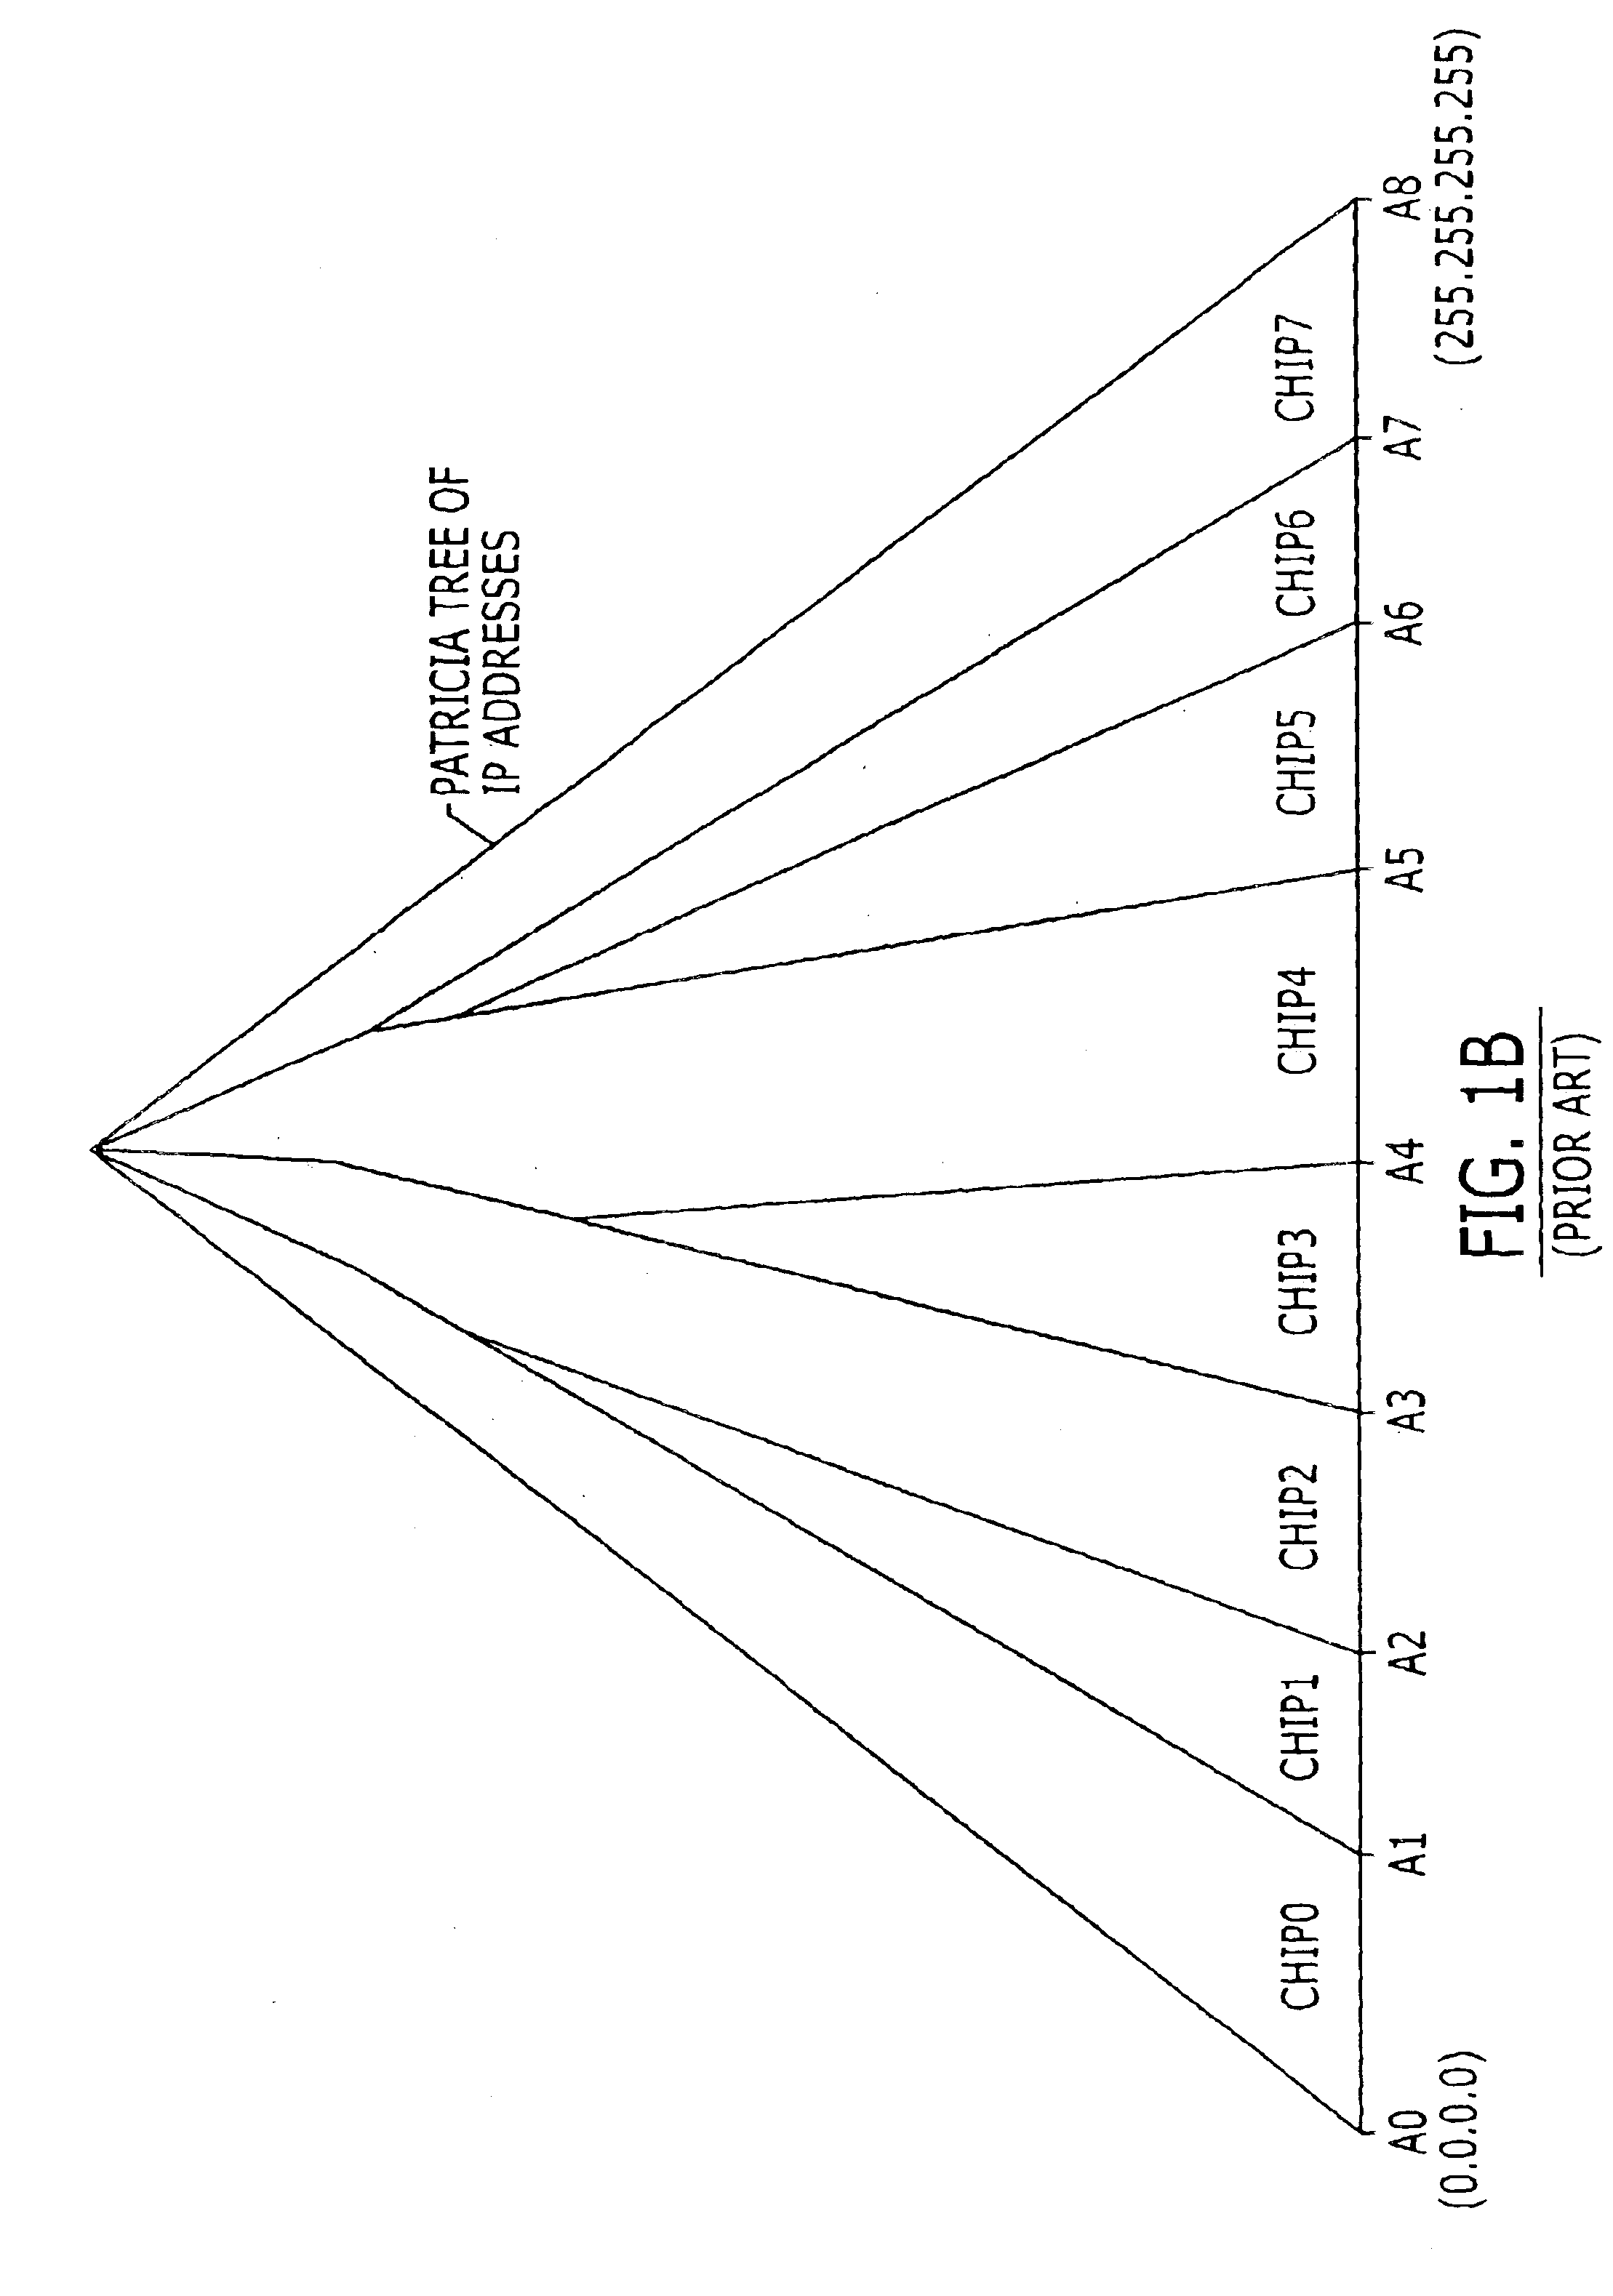 Content addressable memory (CAM) devices with dual-function check bit cells that support column redundancy and check bit cells with reduced susceptibility to soft errors